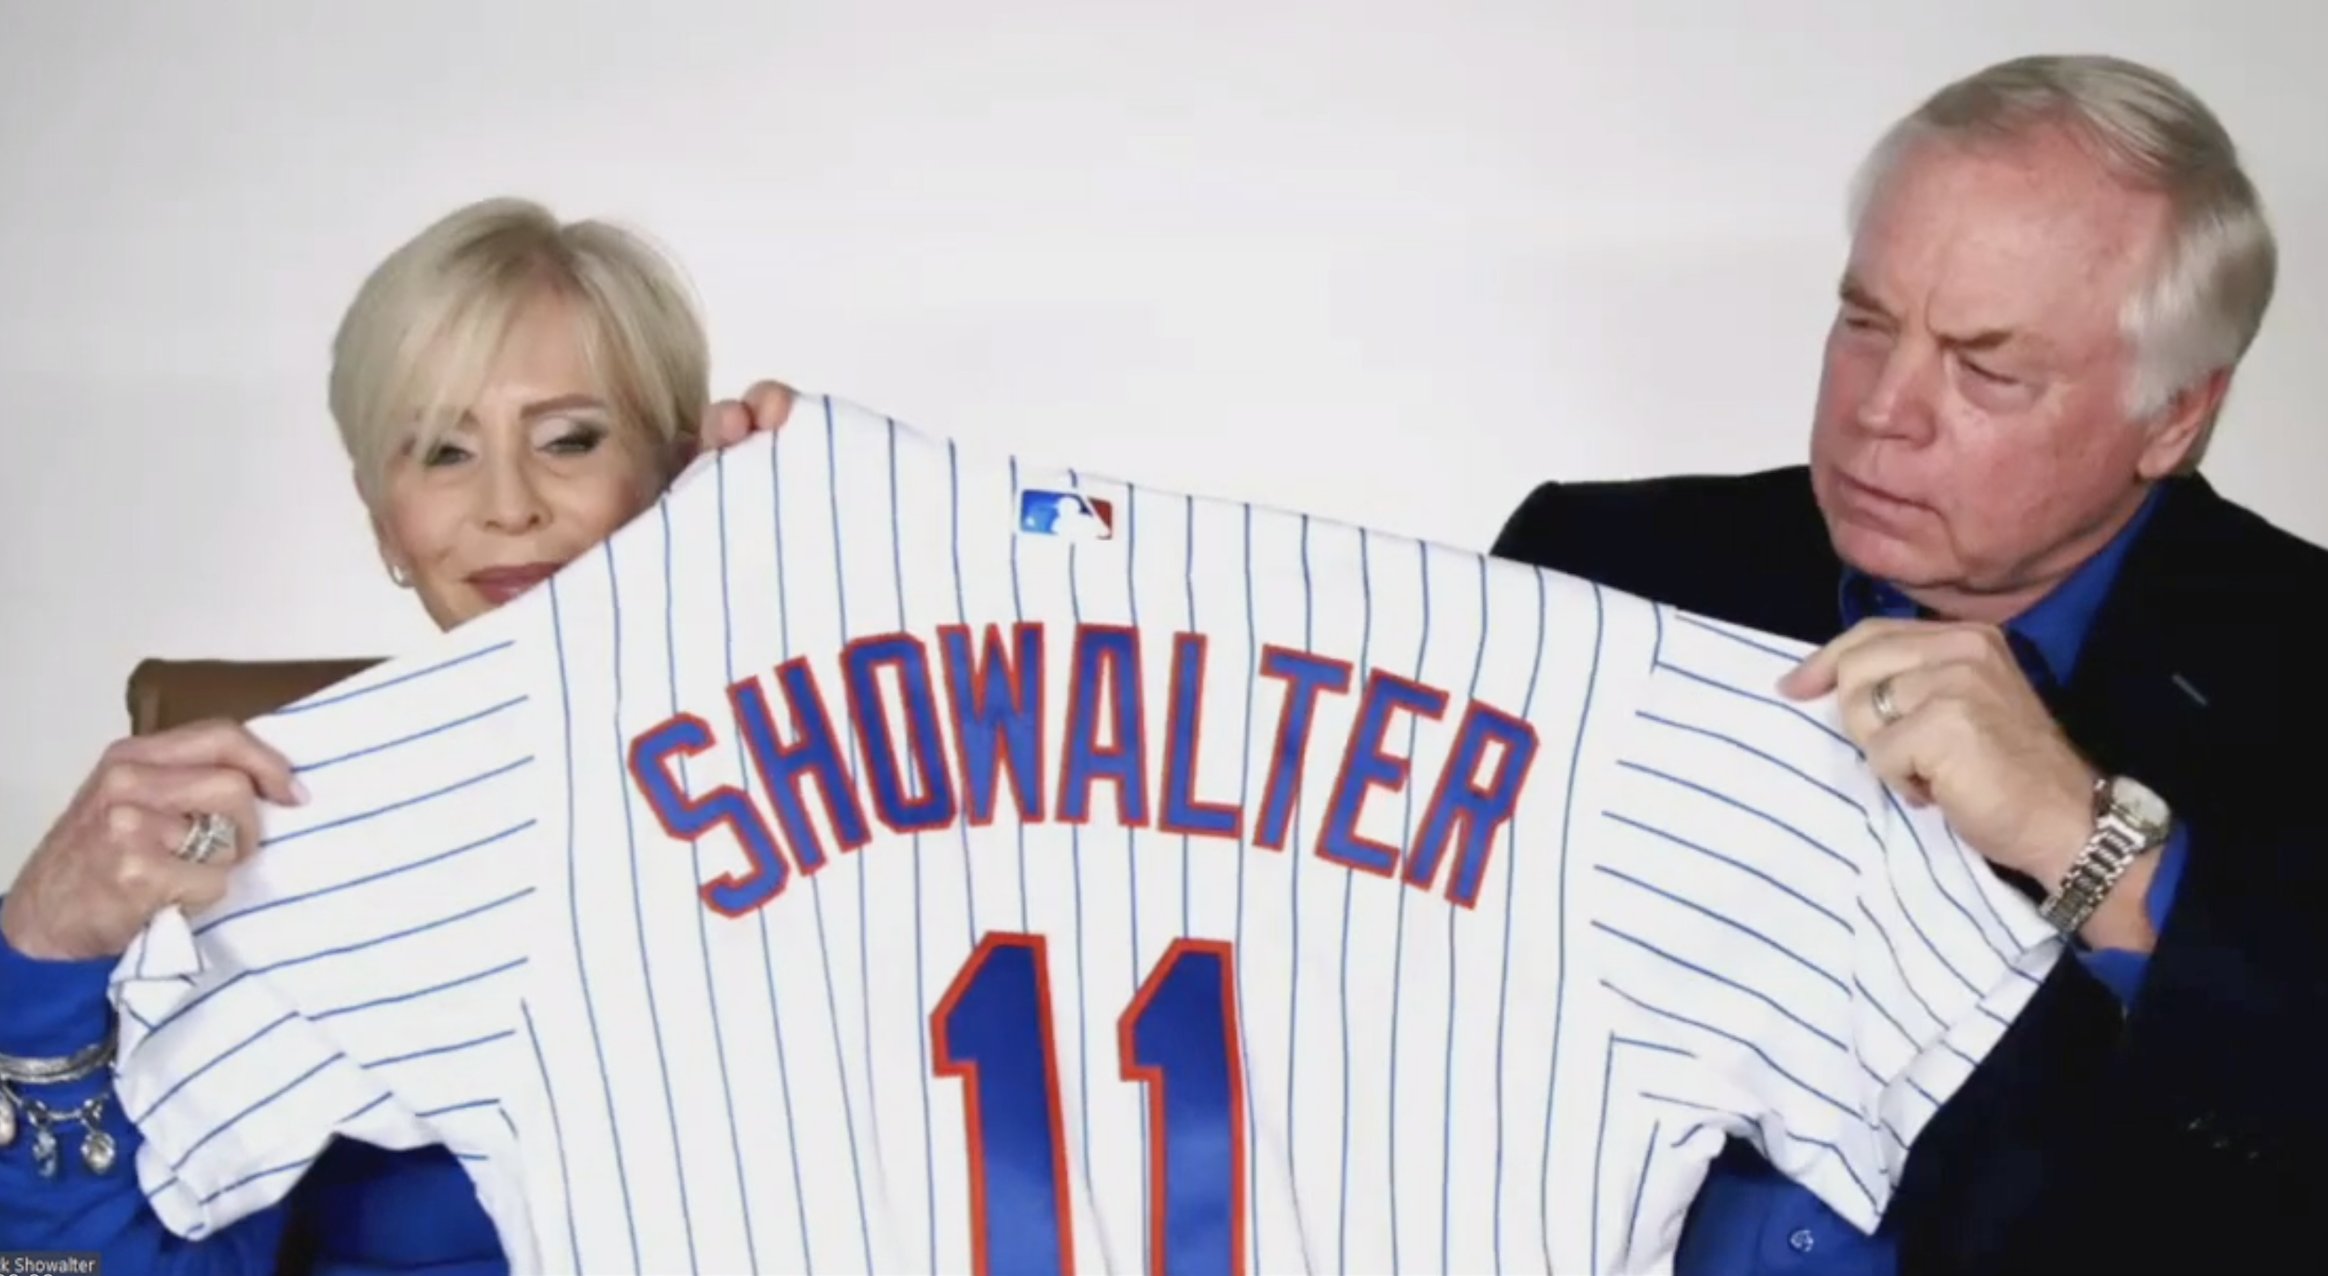 Paul Lukas on X: Buck Showalter will wear No. 11 for the Mets - same  number he wore for the Yanks, D-backs, and Rangers. (He wore No. 26 with  the Orioles as